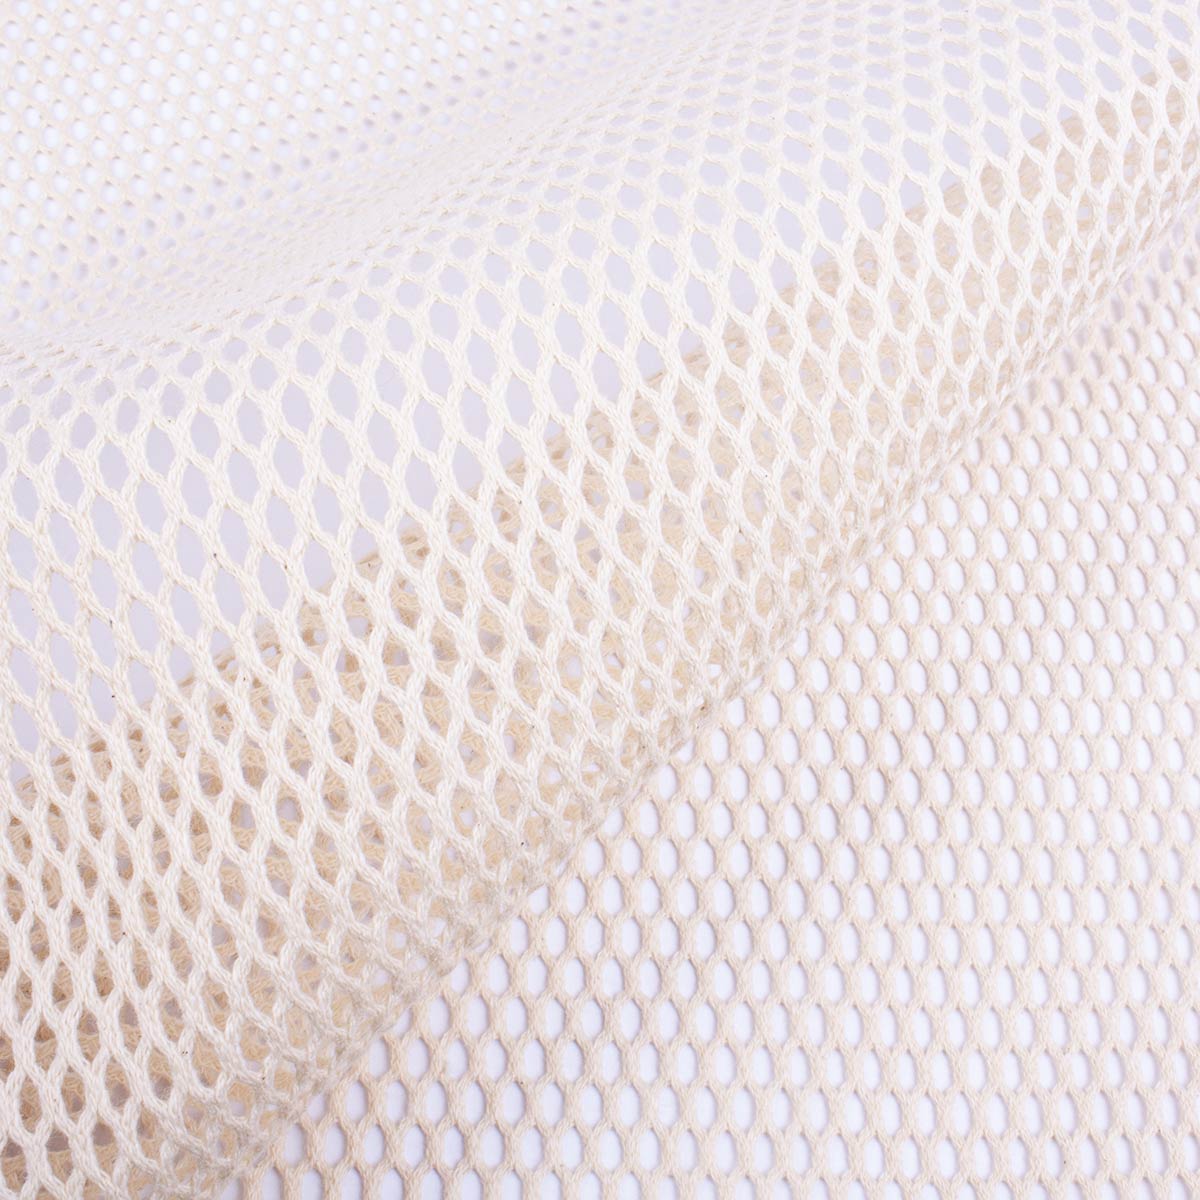 All The Wholesale cotton mesh fabric You Will Ever Need 